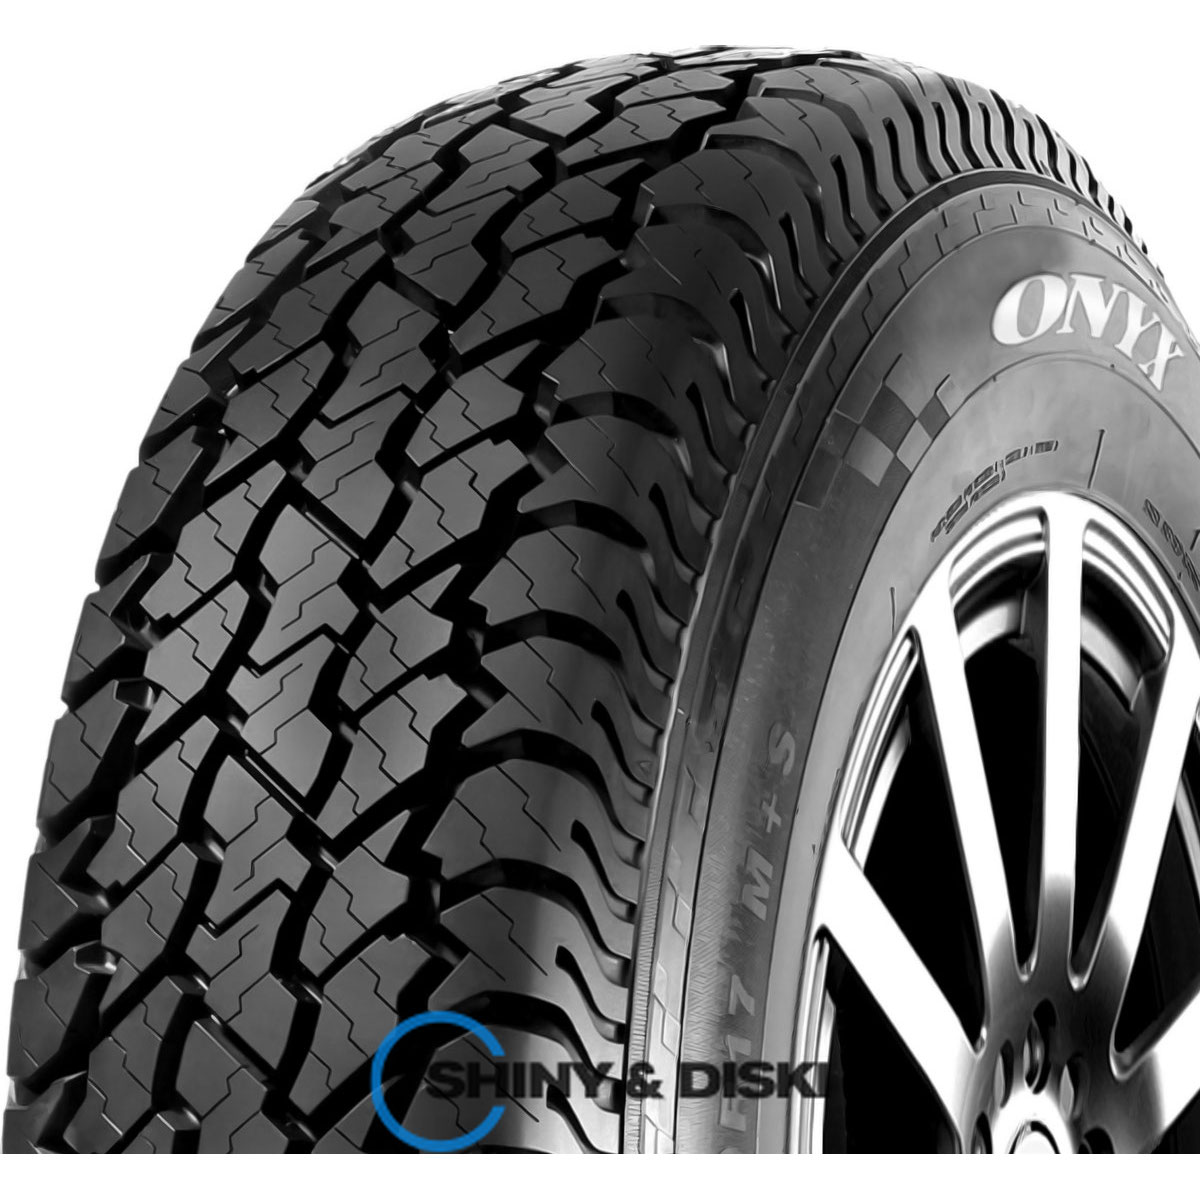 покрышки onyx ny-at187 235/85 r16 120/116r